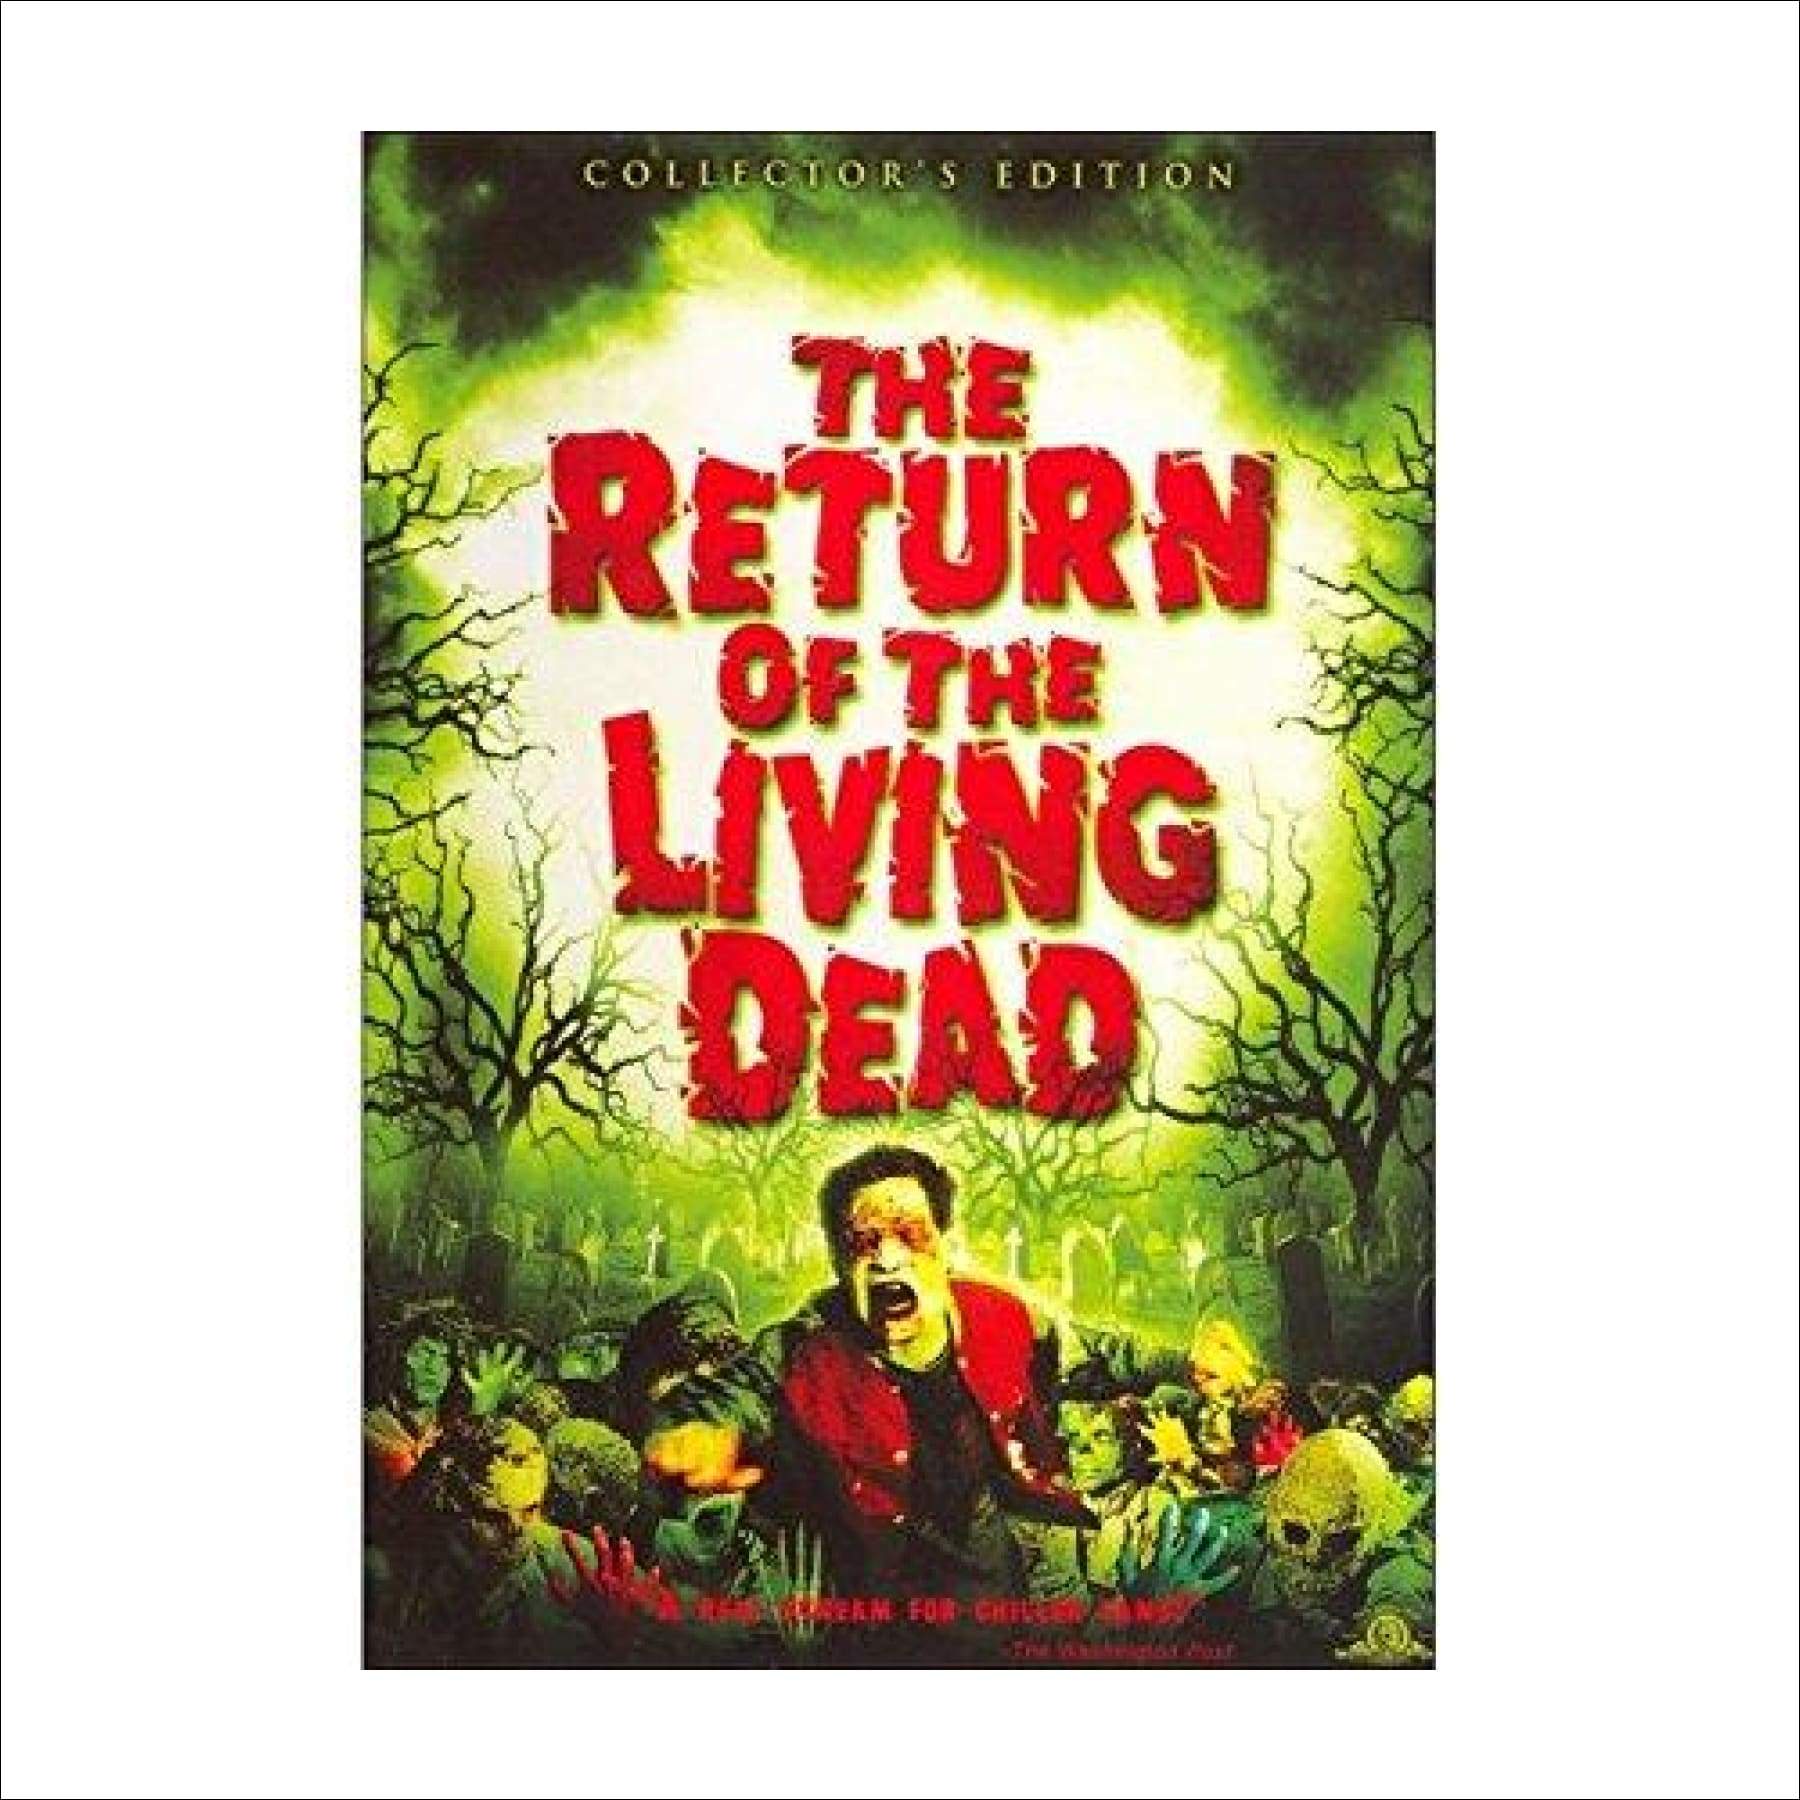 The Return of the Living Dead (DVD), MGM (Video & DVD), Horror - image 2 of 3